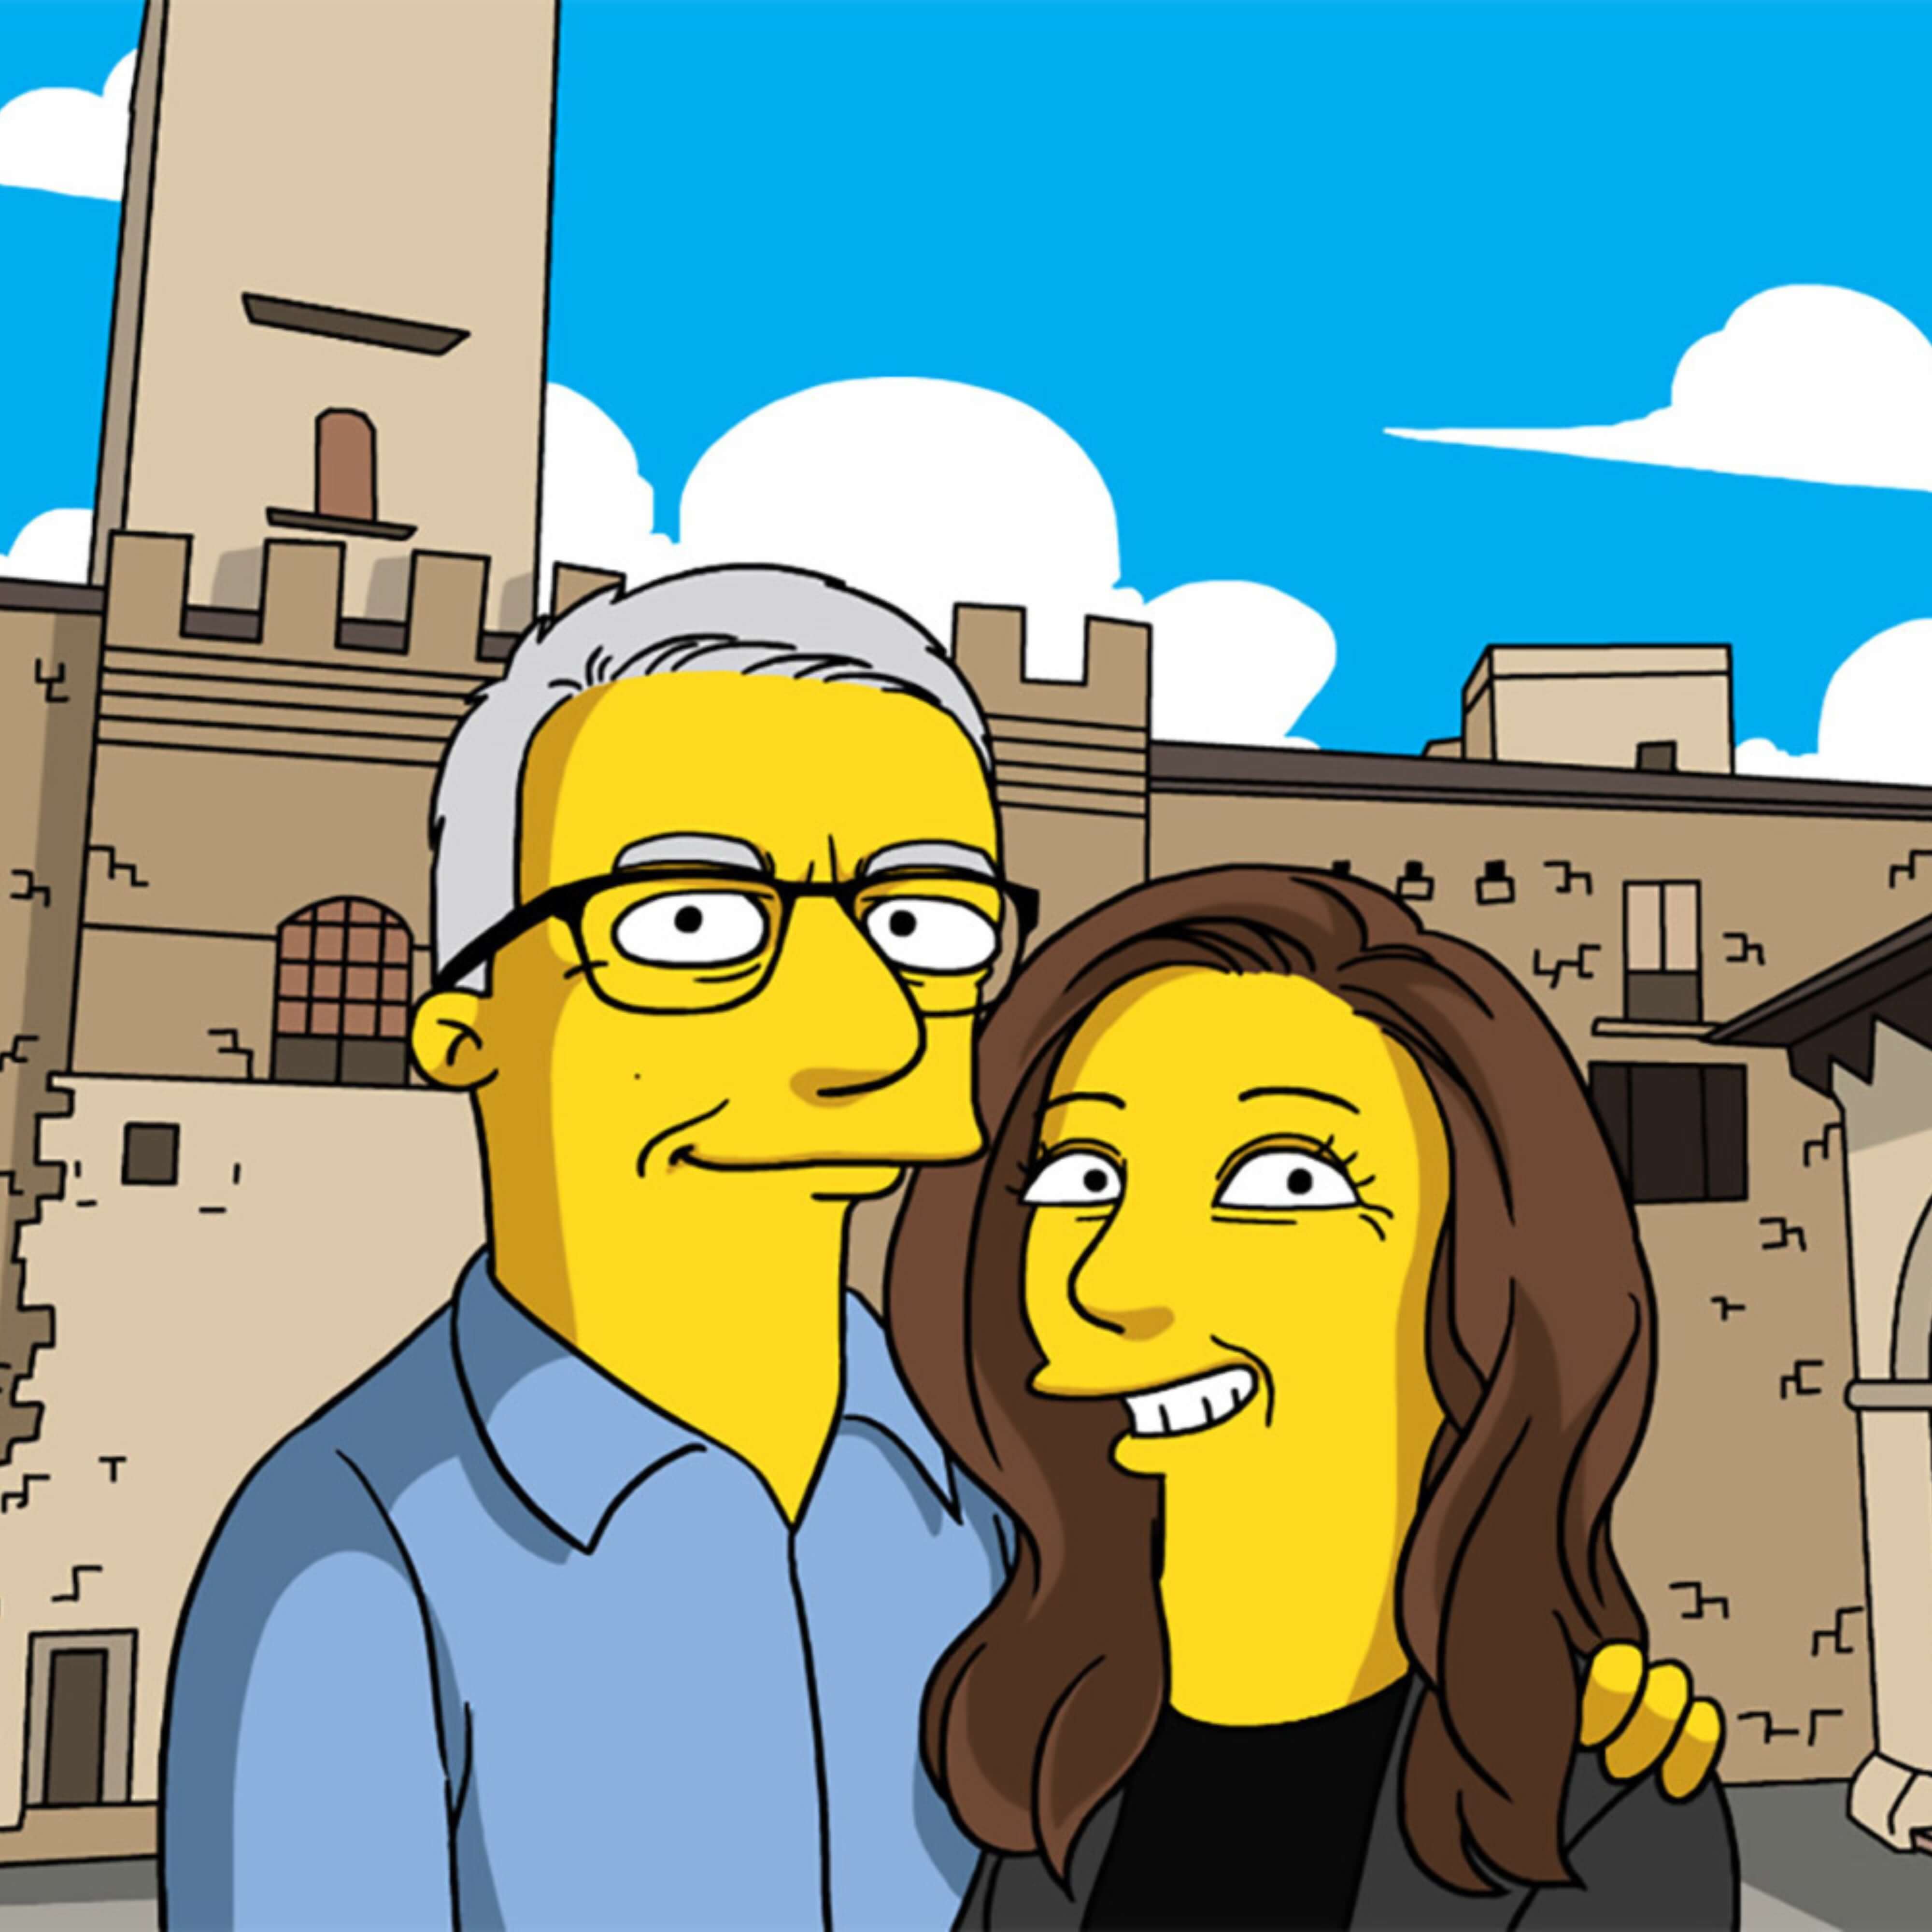 Get Personalized and Vibrant Yellow Custom Portraits for Your Loved Ones